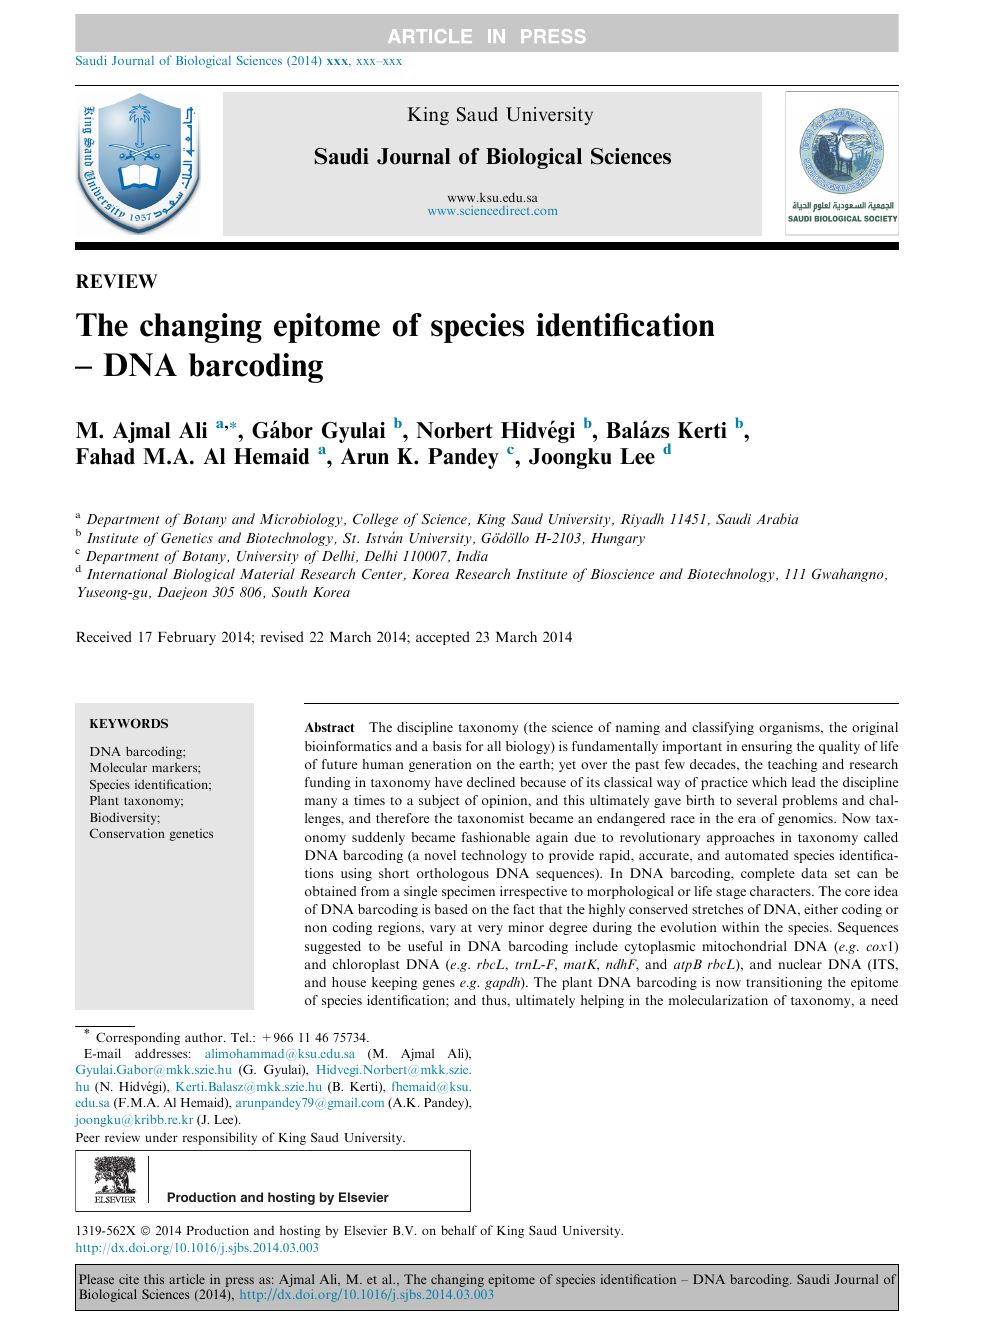 The Changing Epitome Of Species Identification Dna Barcoding Topic Of Research Paper In Biological Sciences Download Scholarly Article Pdf And Read For Free On Cyberleninka Open Science Hub